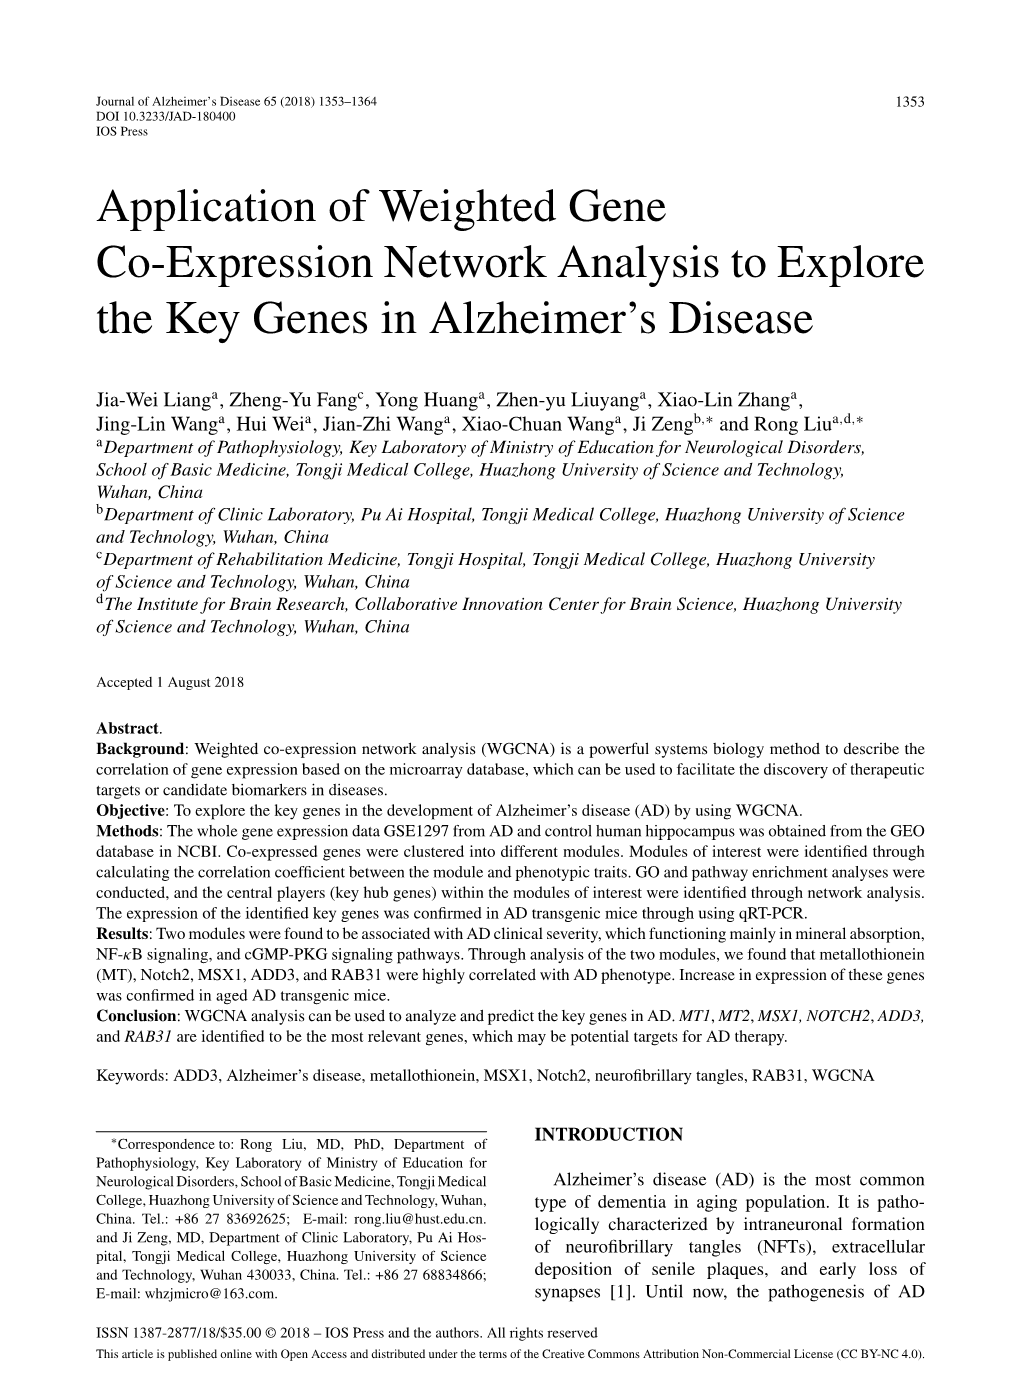 Application of Weighted Gene Co-Expression Network Analysis to Explore the Key Genes in Alzheimer’S Disease